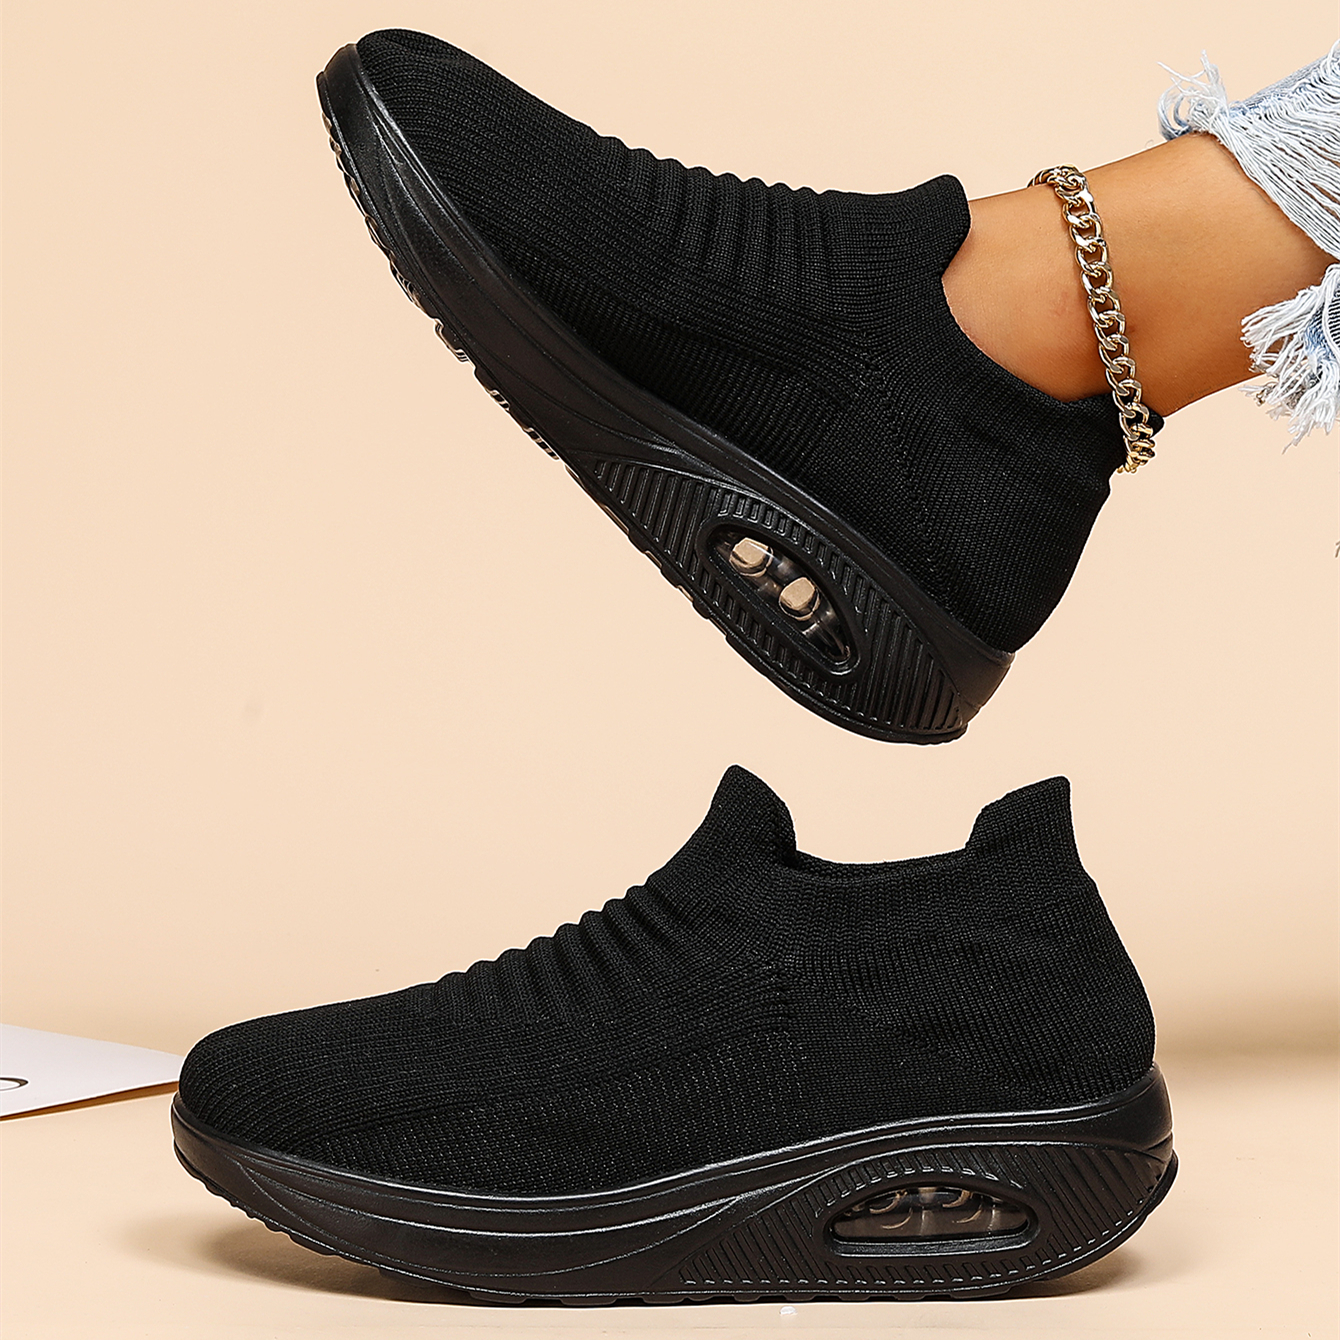 womens breathable knit sneakers lightweight low top slip on shoes womens fashion air cushion shoes details 0